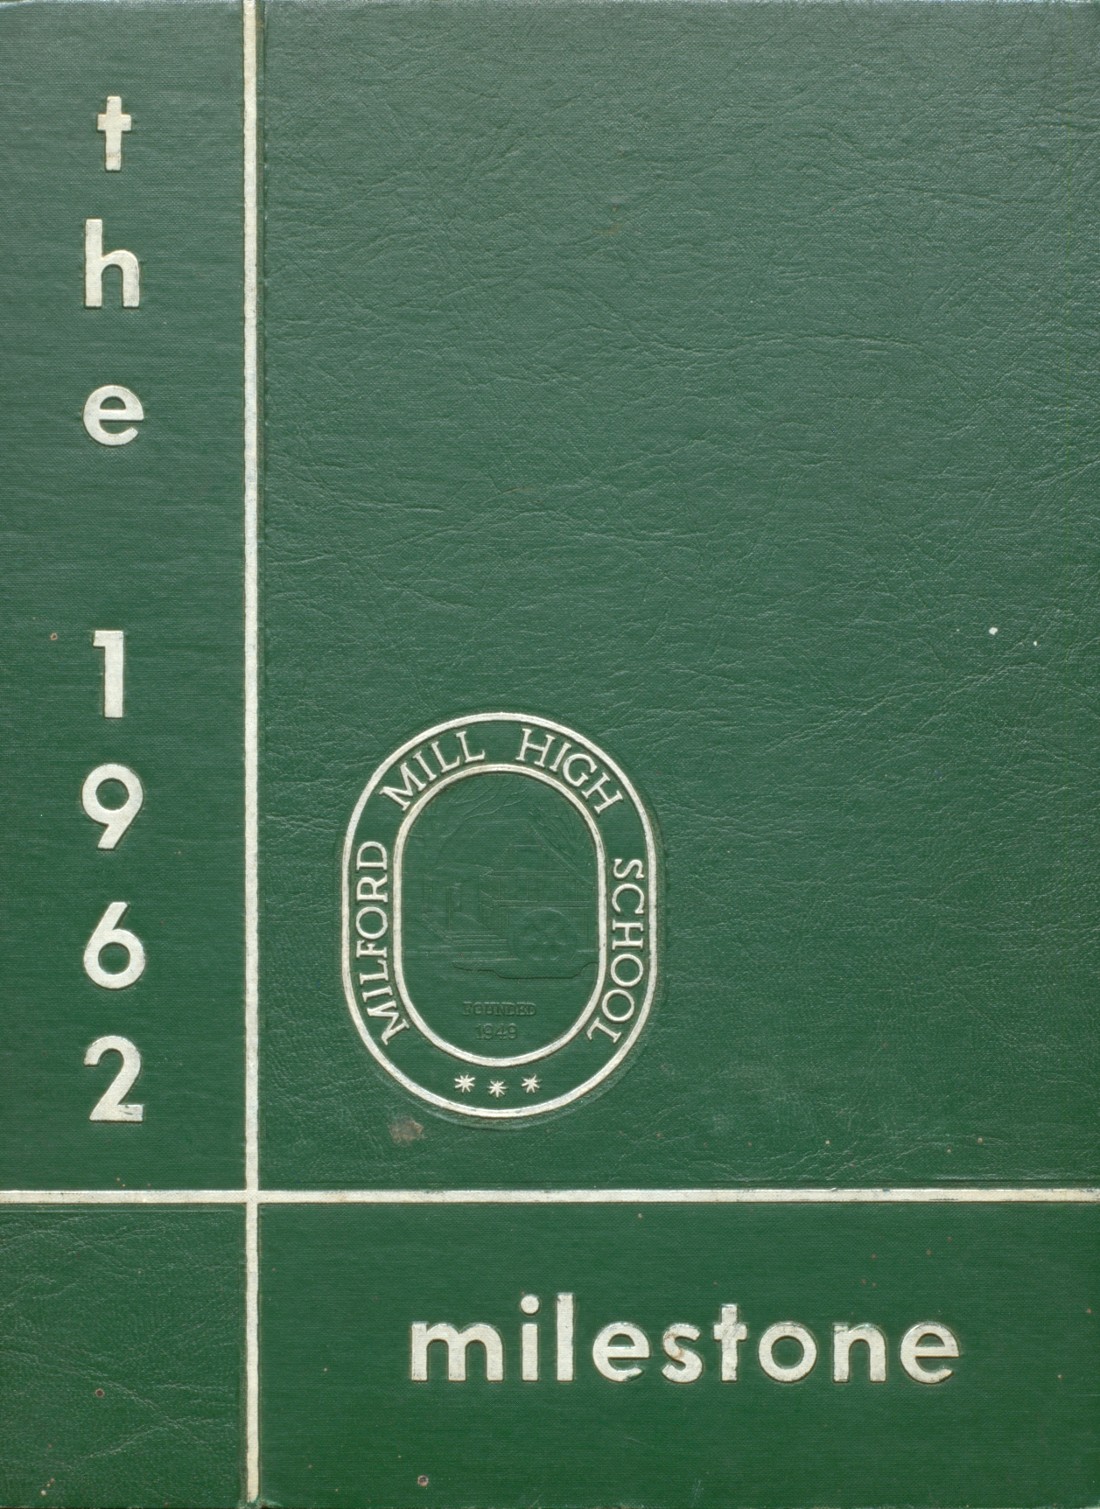 1962 yearbook from Milford Mill High School/Academy from Baltimore